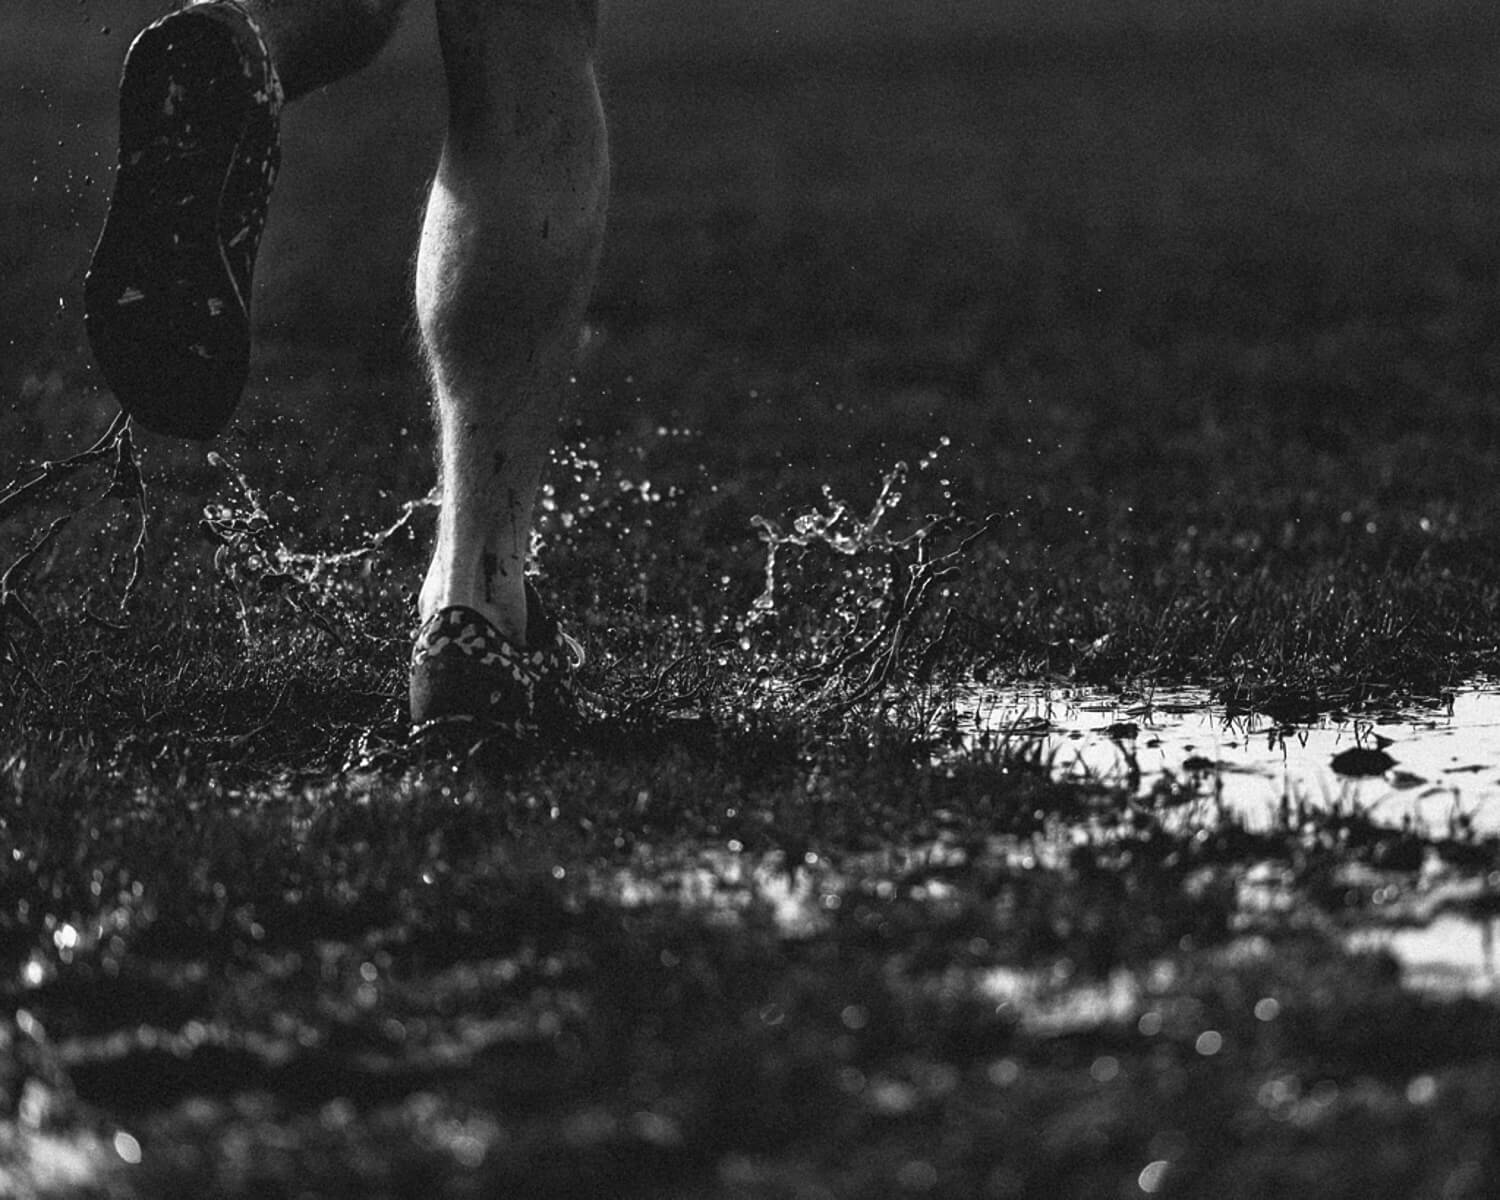  run in muddy field by lifestyle photographer Tim Cole